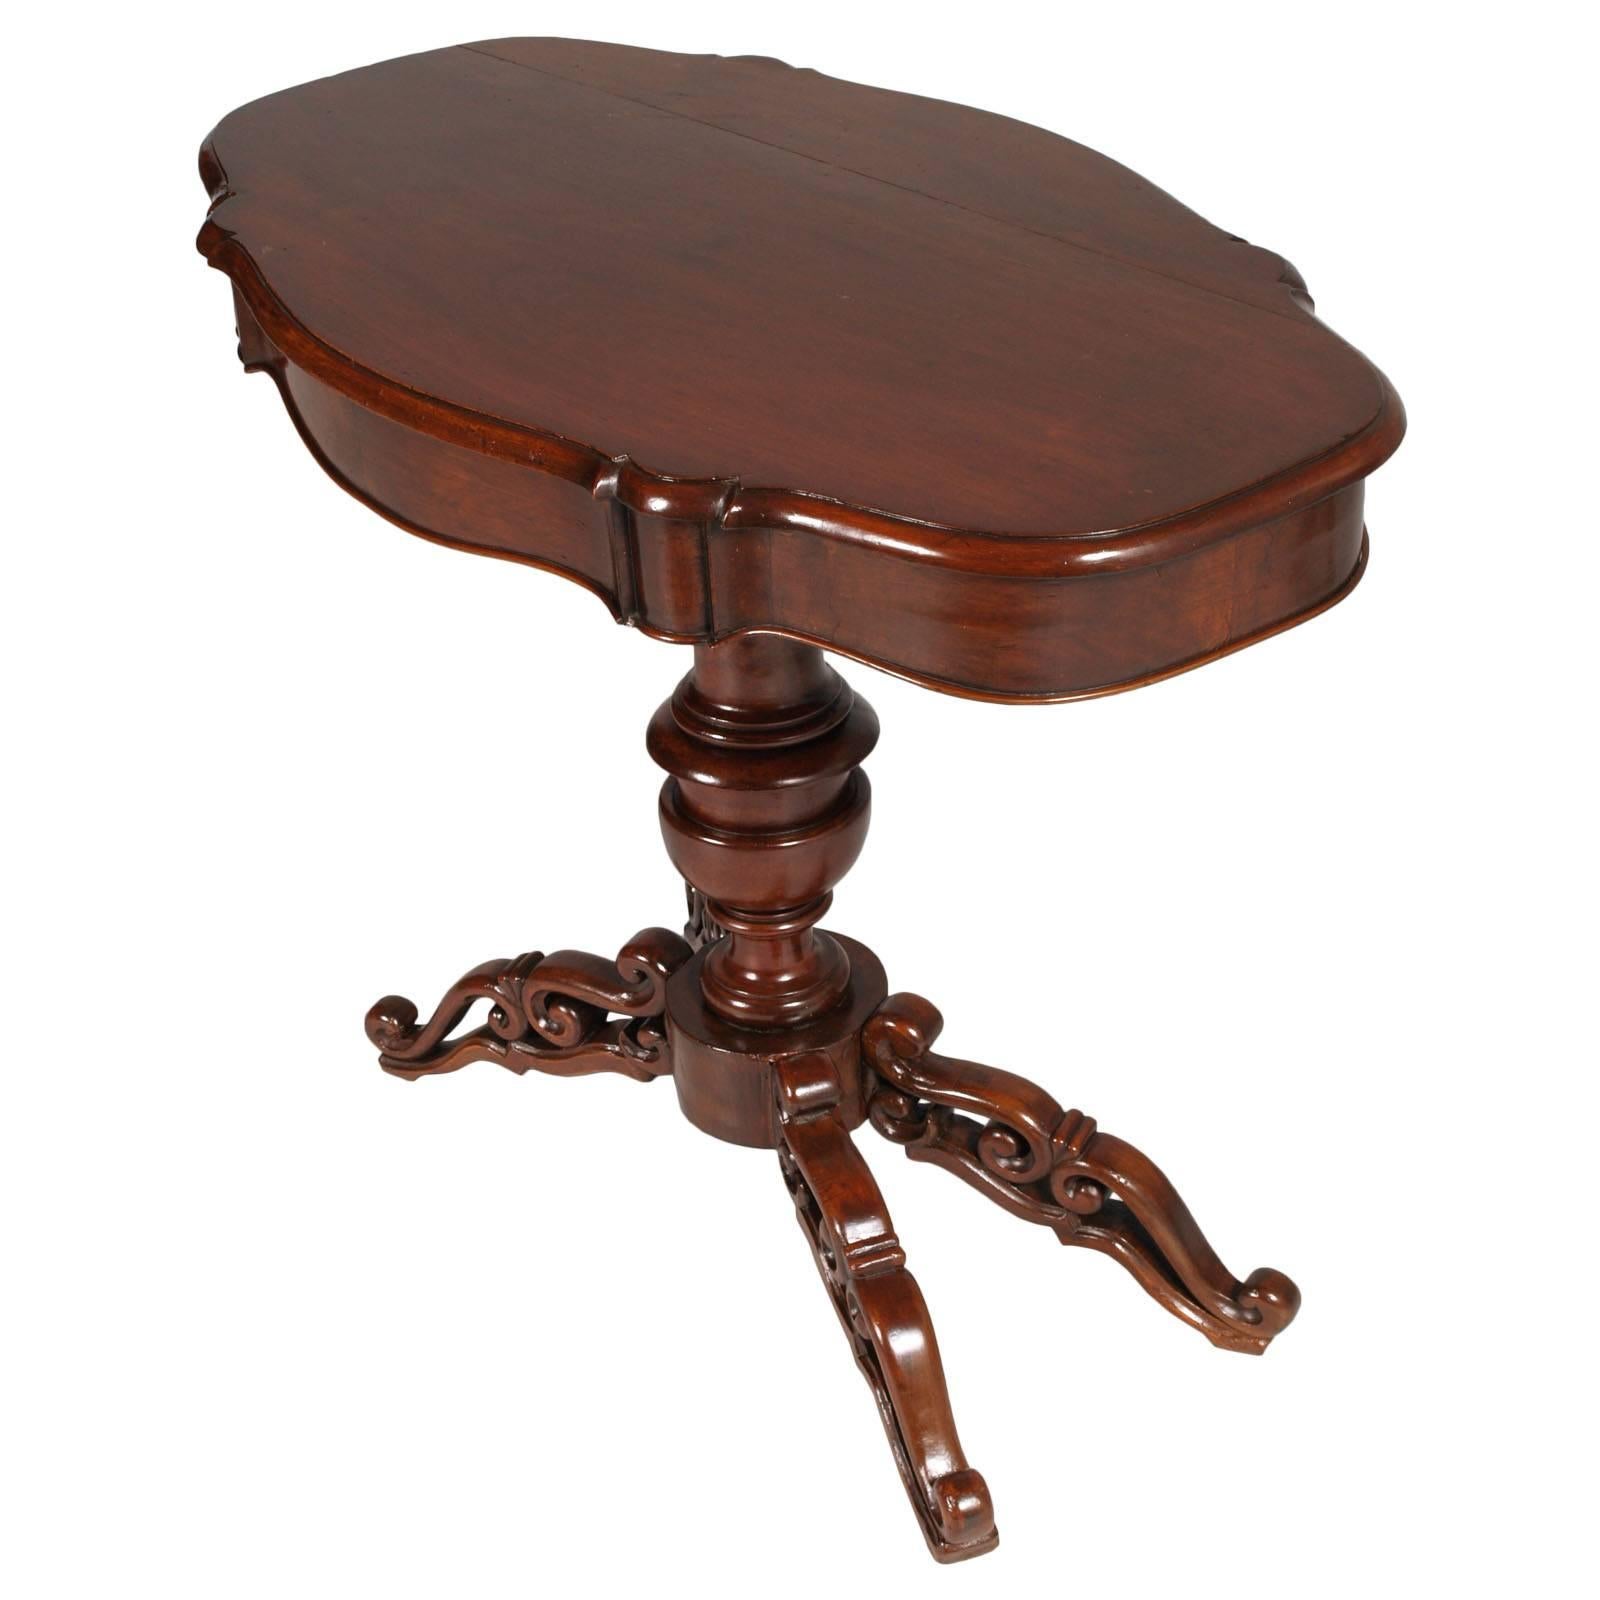 Important 18th century  Baroque  table in hand carved walnut by Cucchi & Sola Ammobigliamenti
Restored and finished to wax . Excellent condition.

Measure cm: H 78 x W 95 x D 54.